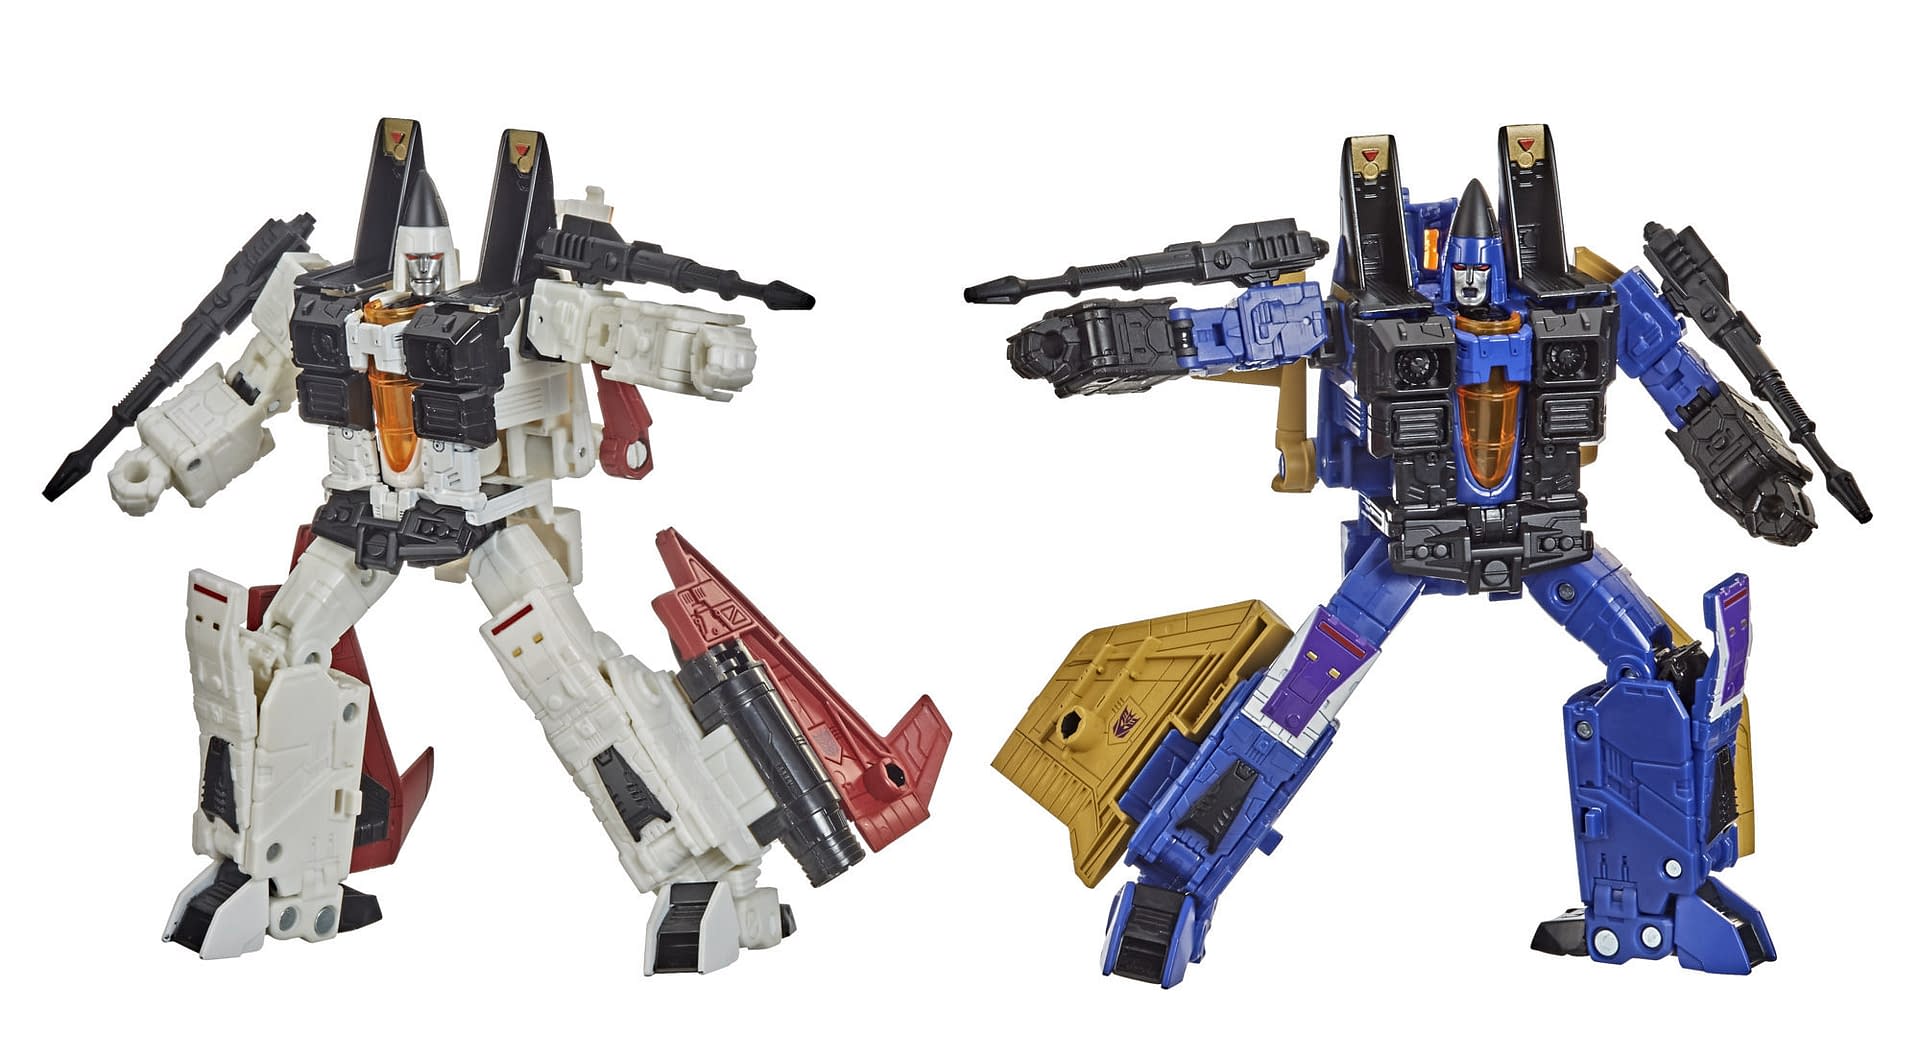 Transformers Get Some Amazon Exclusive 2-Packs from Hasbro